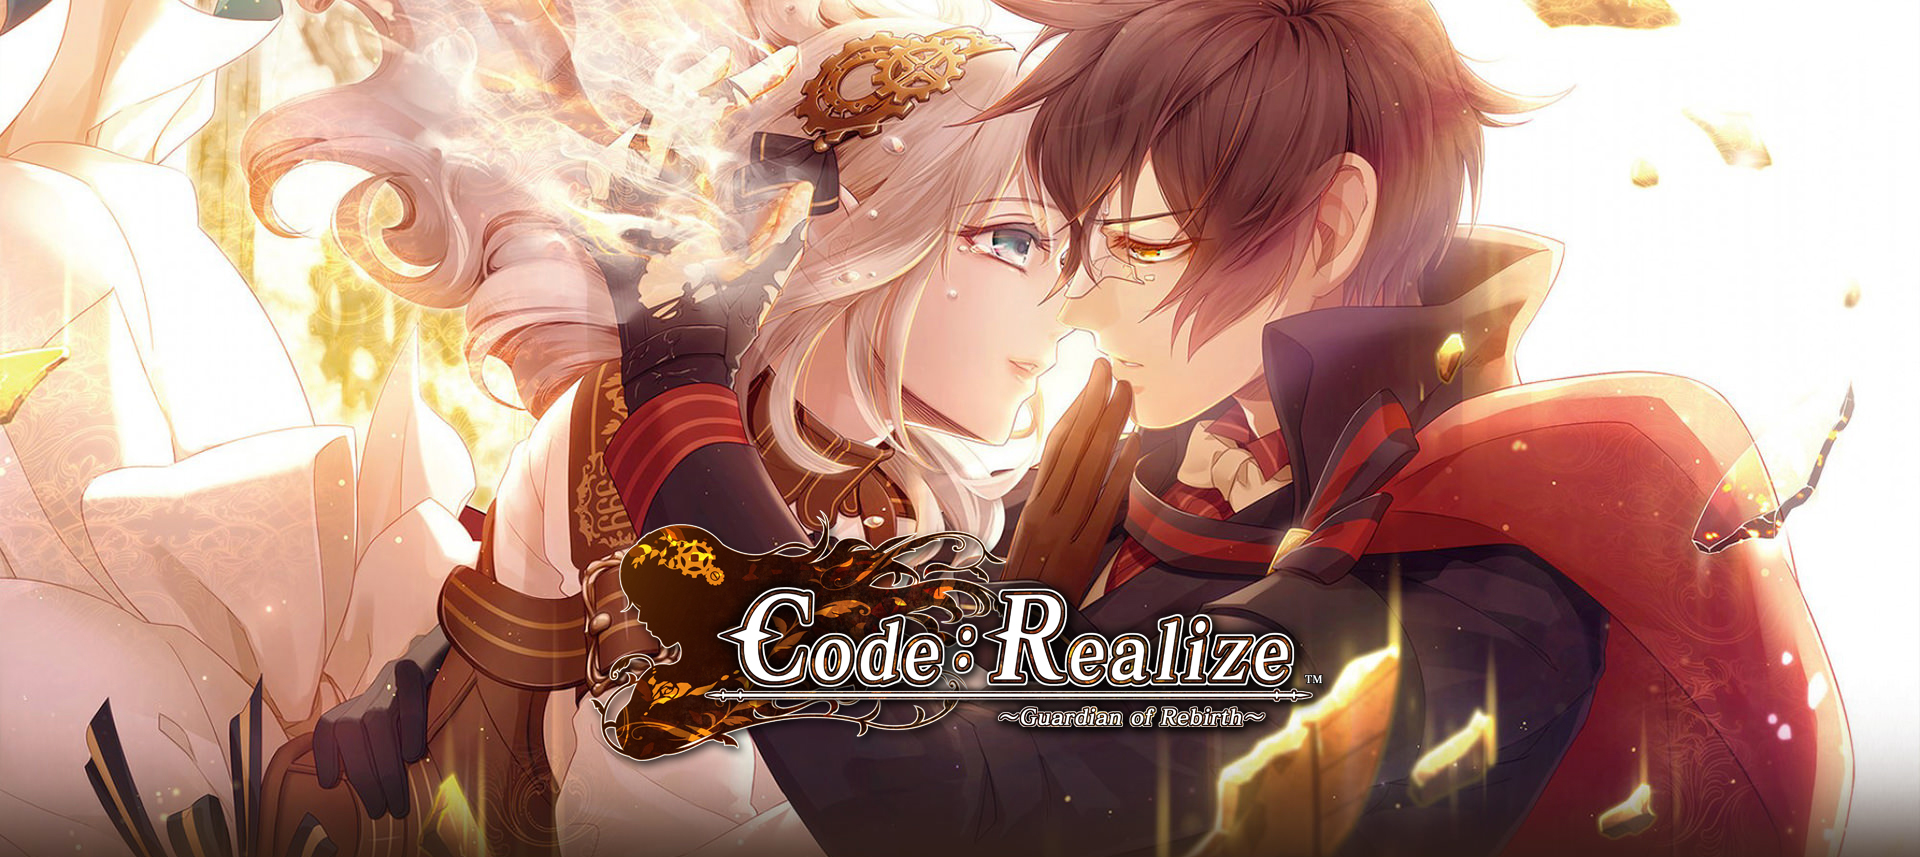 Code: Realize ~Guardian of Rebirth~ | Official | Just another Aksys Games Network site